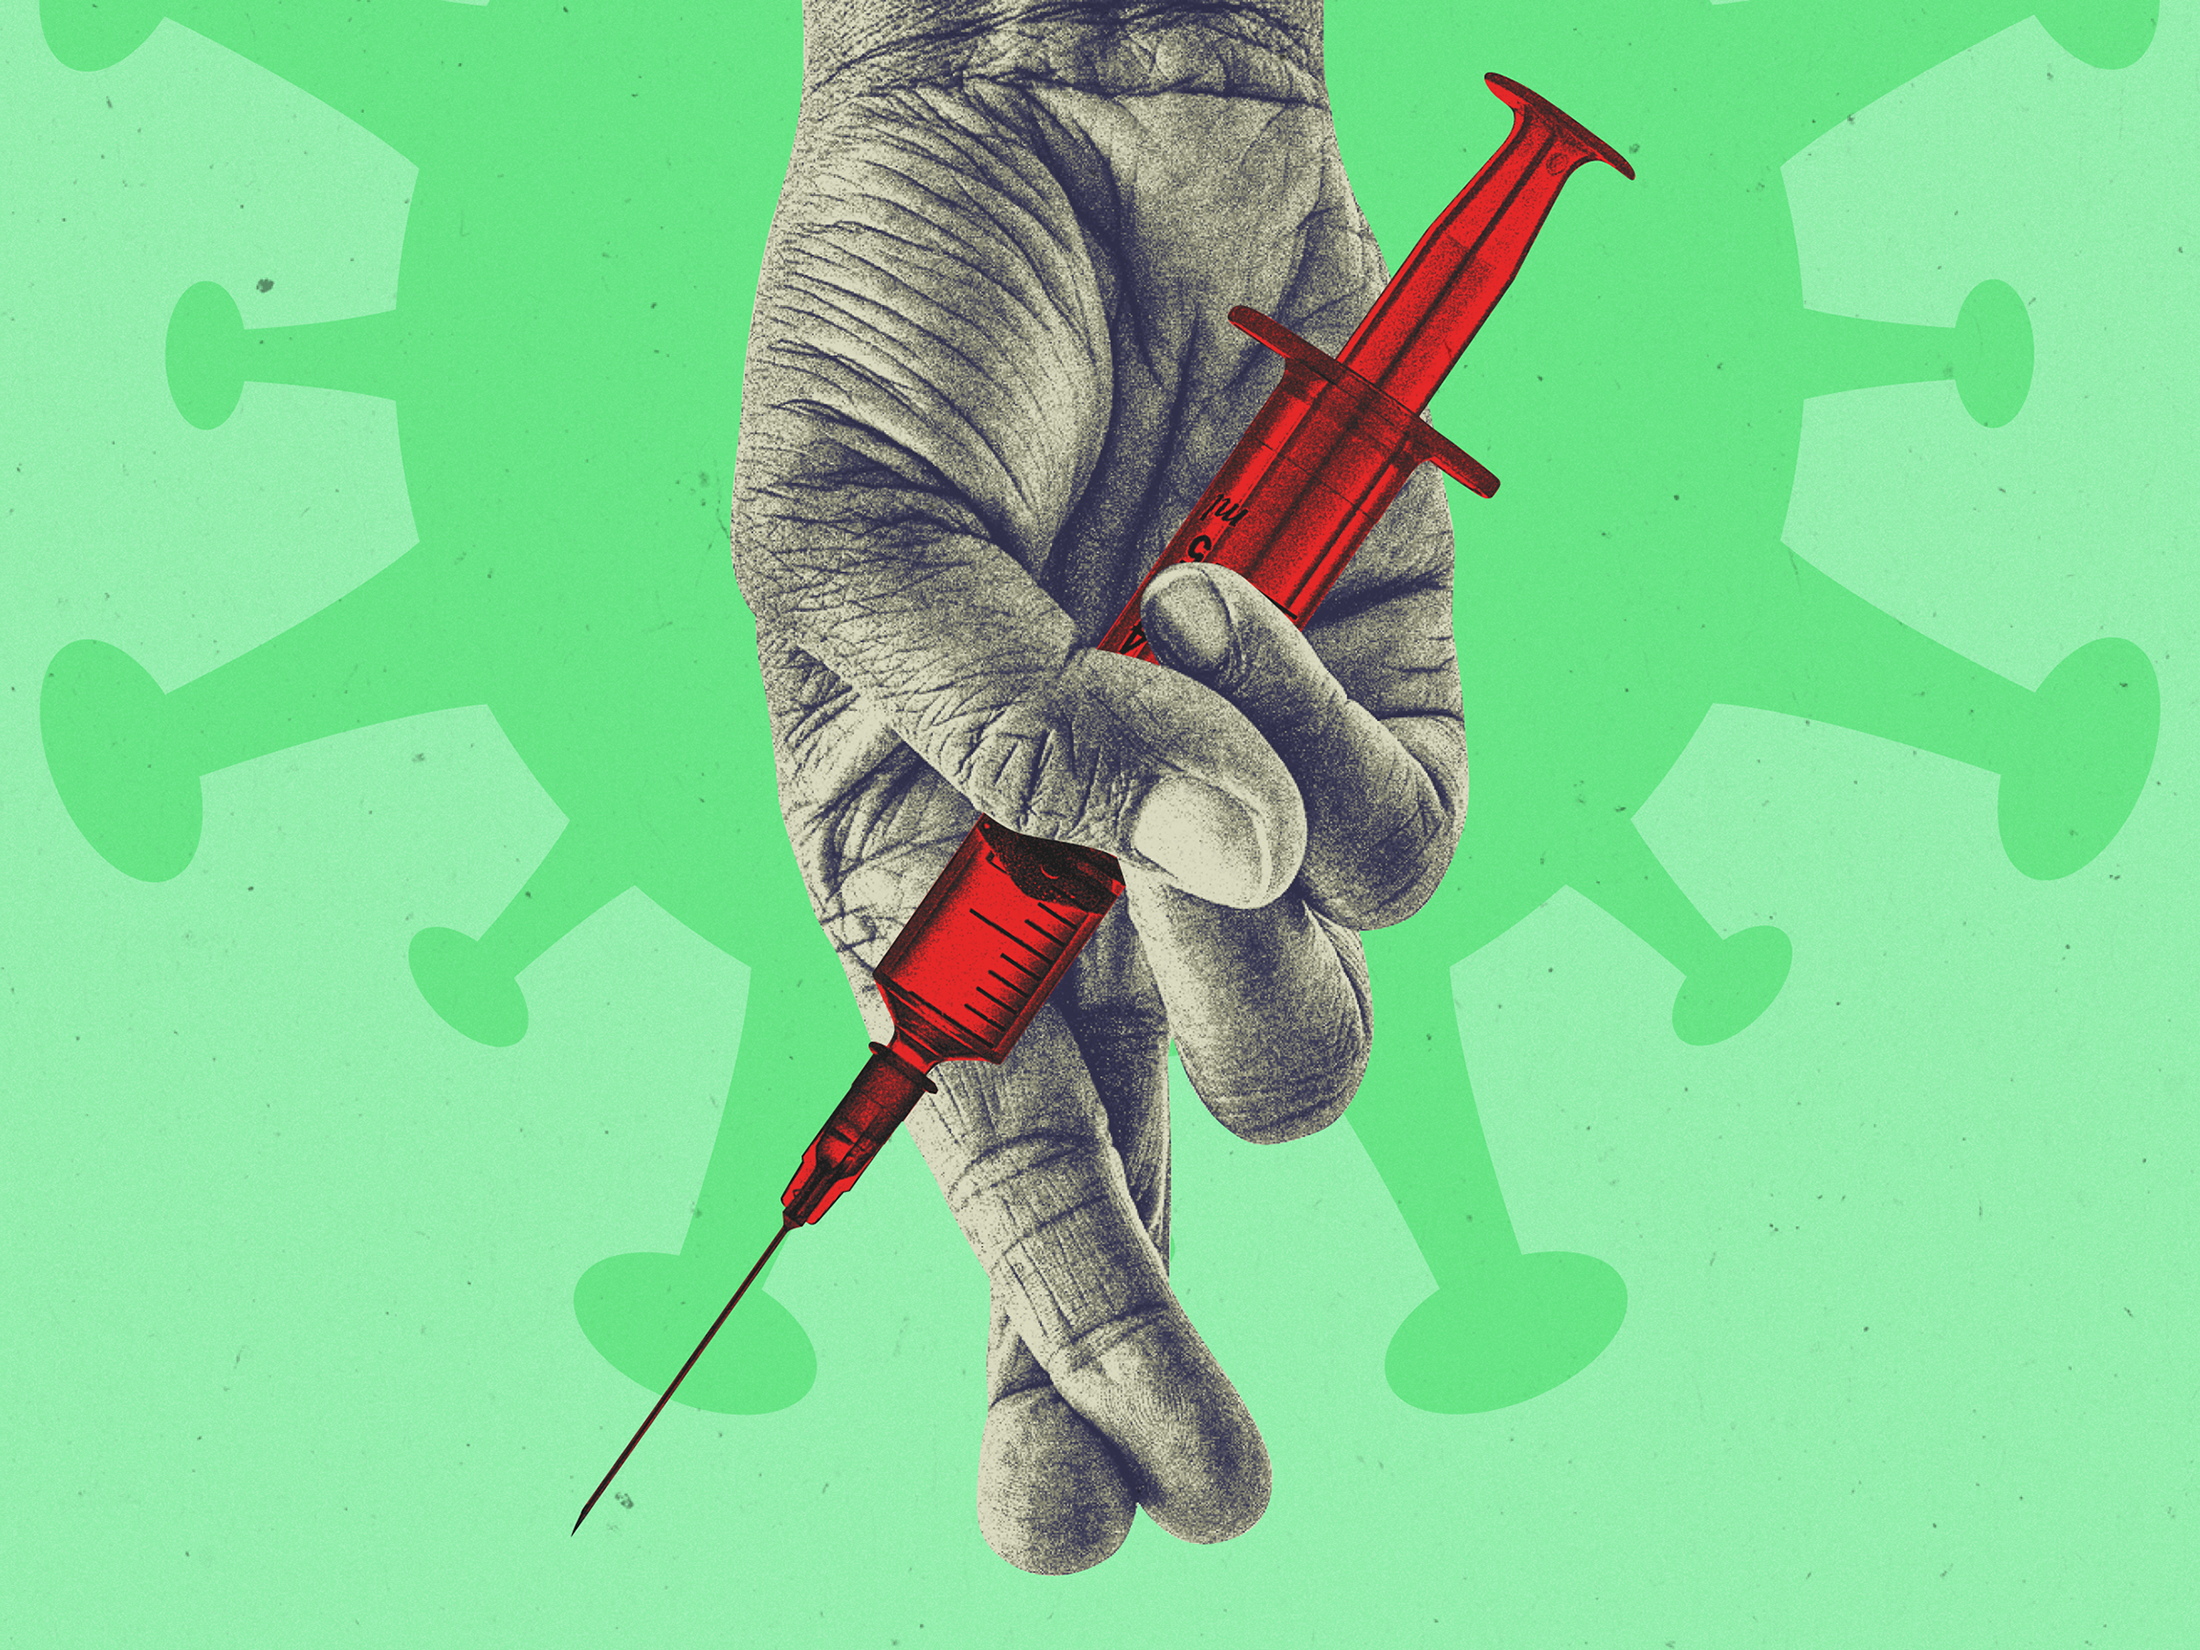 A hand with crossed fingers holding a vaccine syringe with a coronavirus shape behind it on a green background